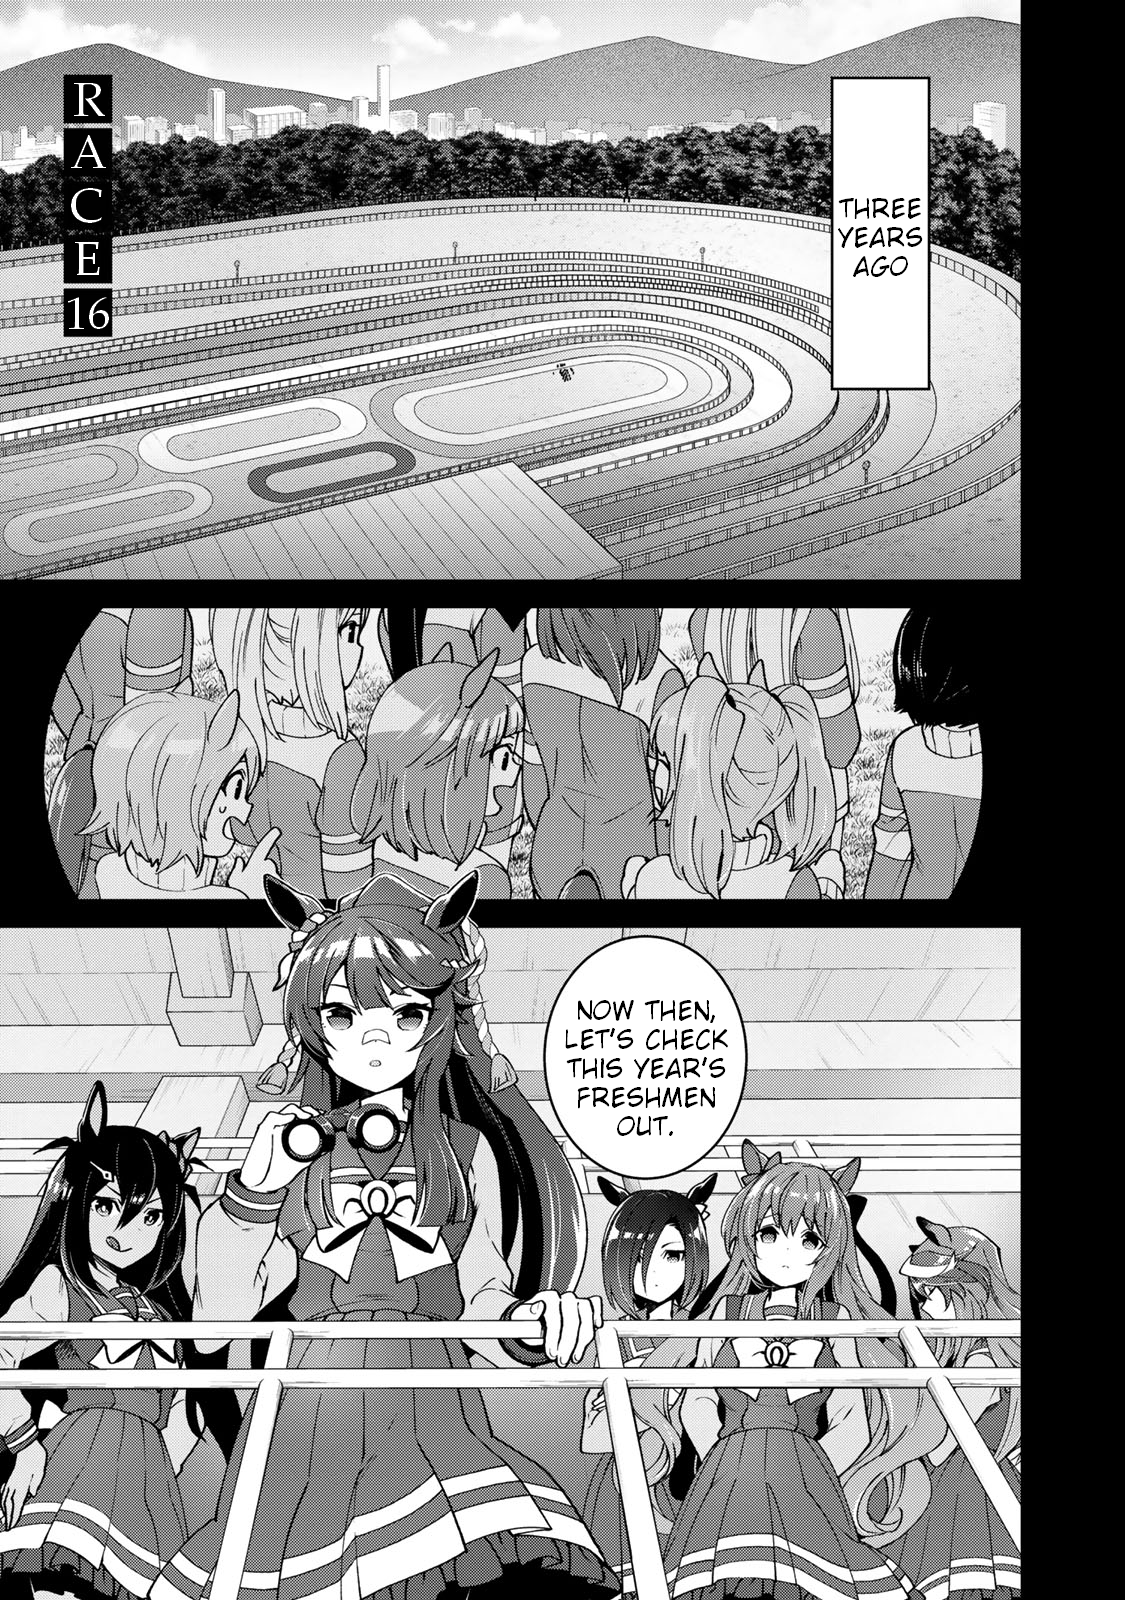 Starting Gate! Uma Musume Pretty Derby Vol.3 Chapter 16: An Extraordinary Day #2 - Picture 1